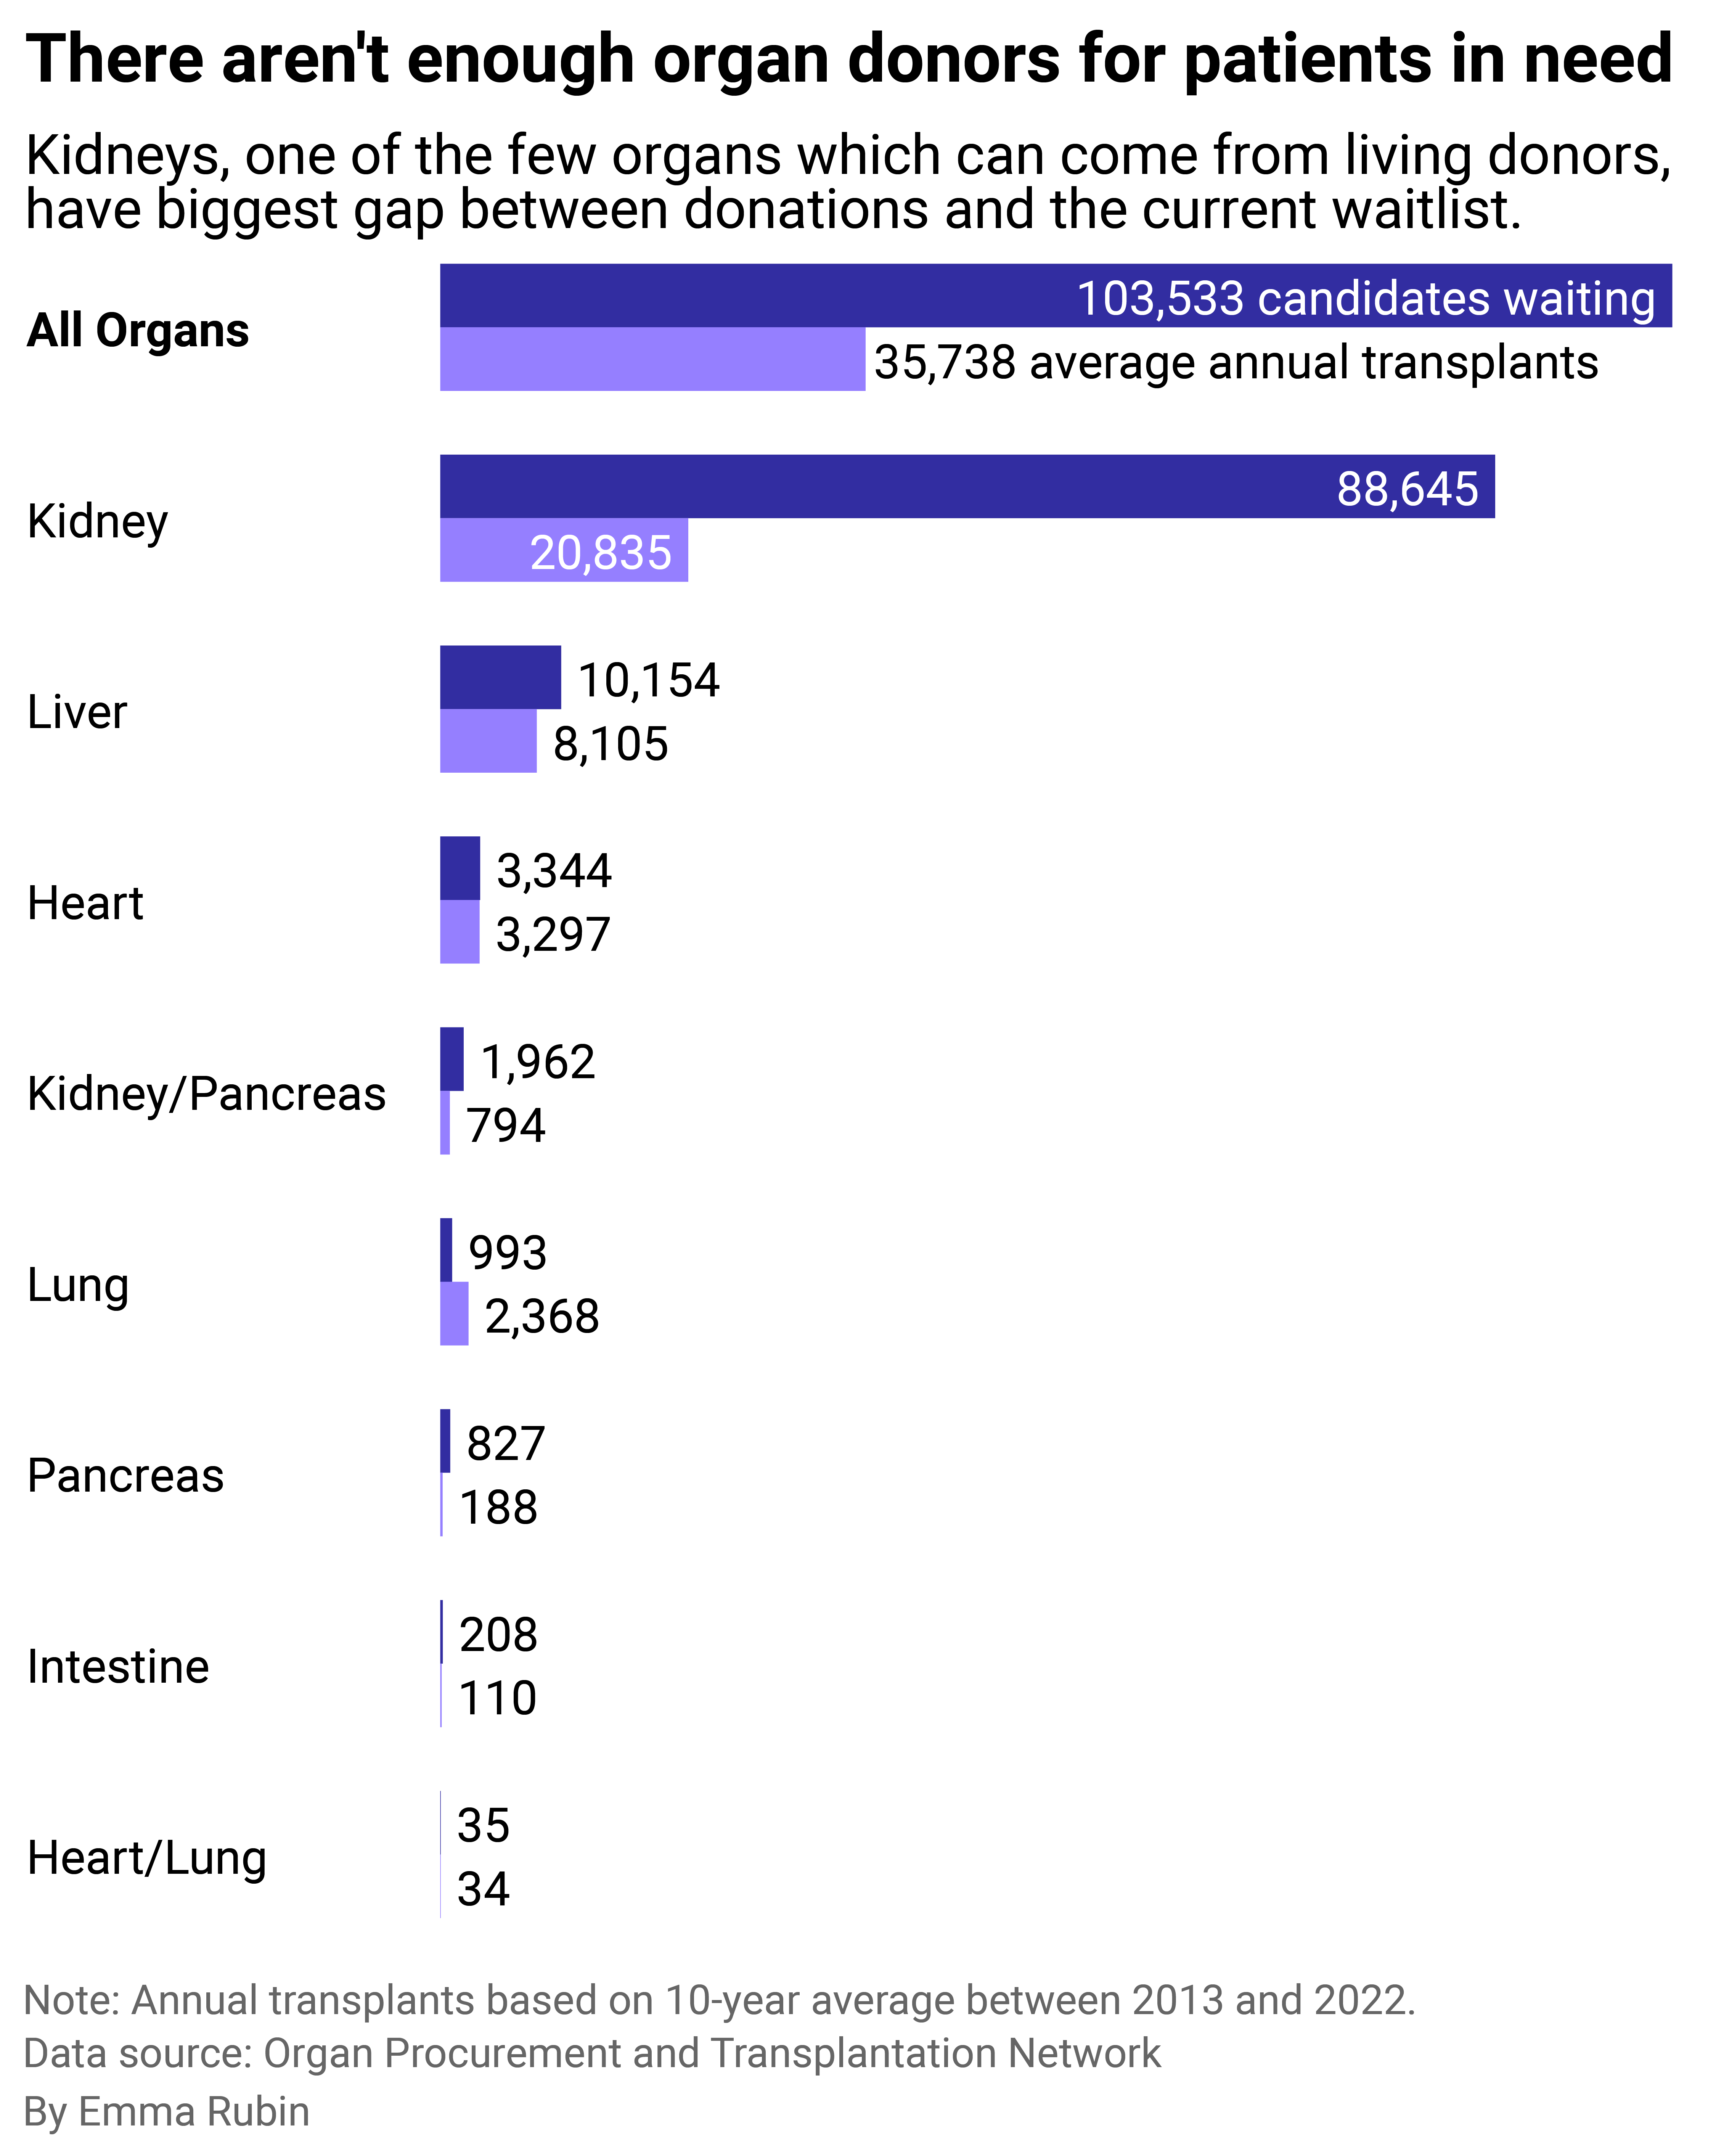 Grouped bar chart showing there aren't enough organ donors for patients in need.